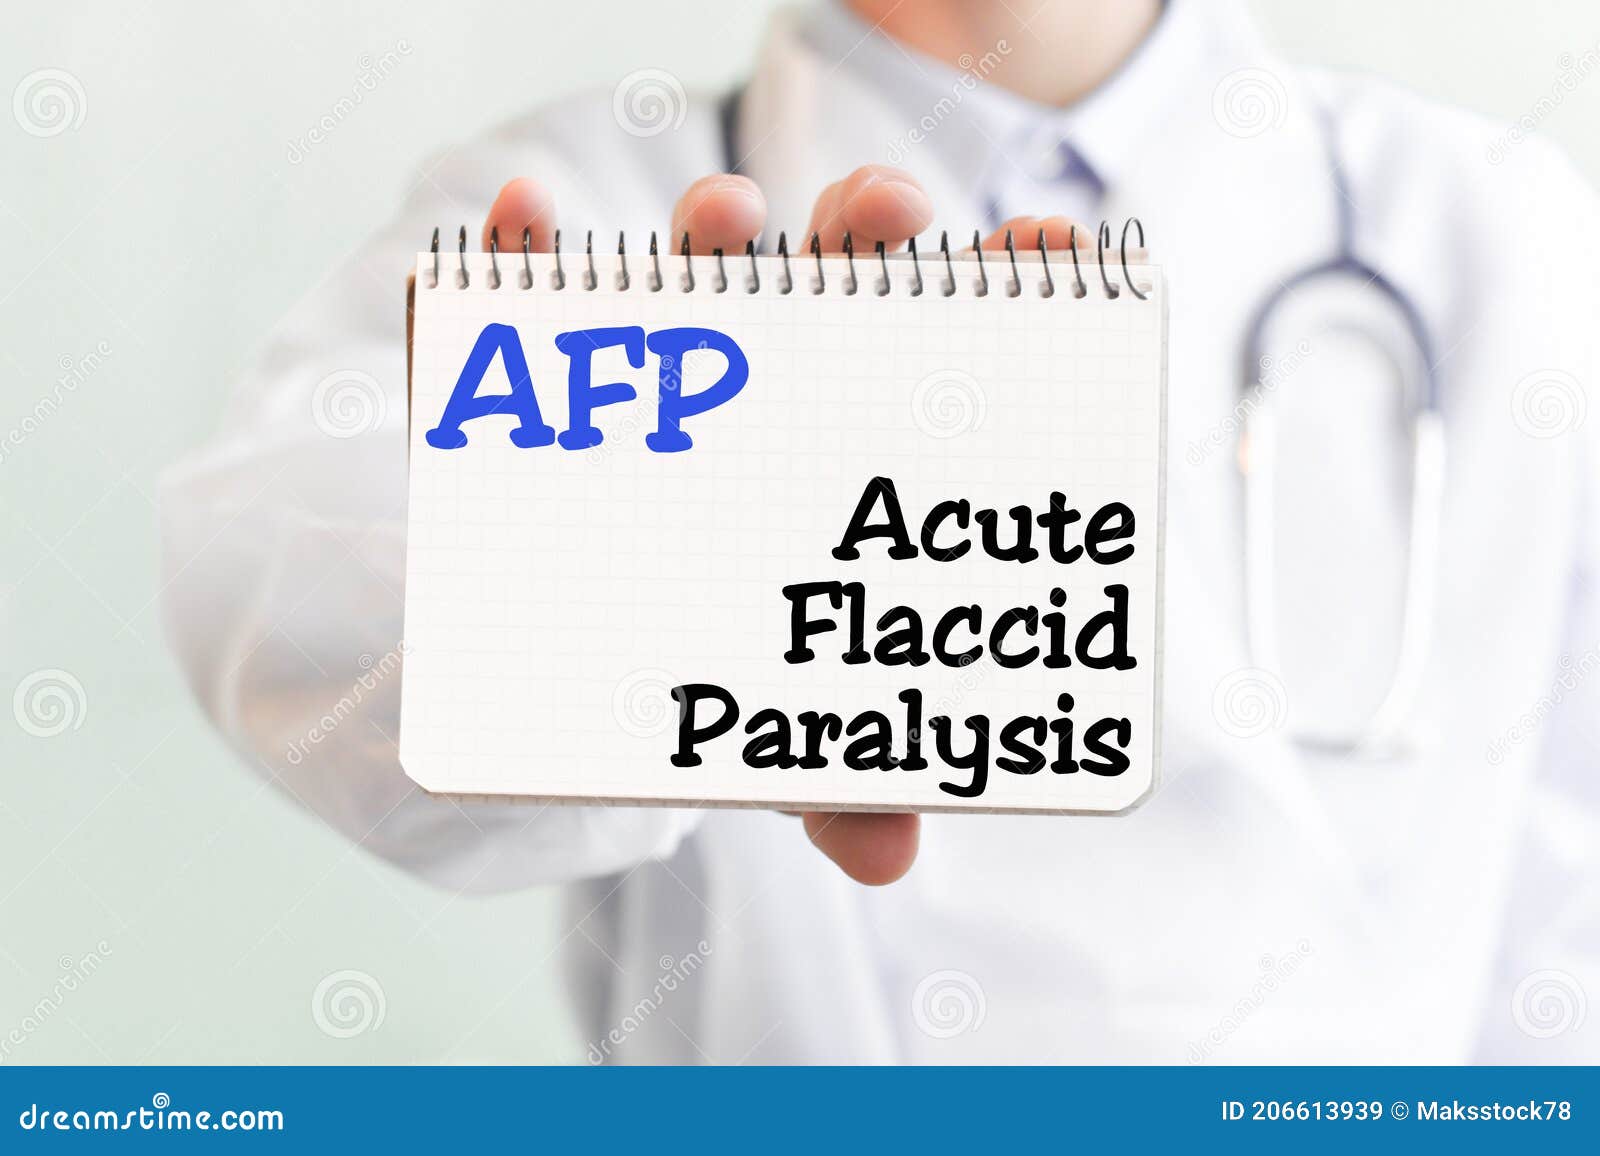 doctor holding a card with text afp, medical concept